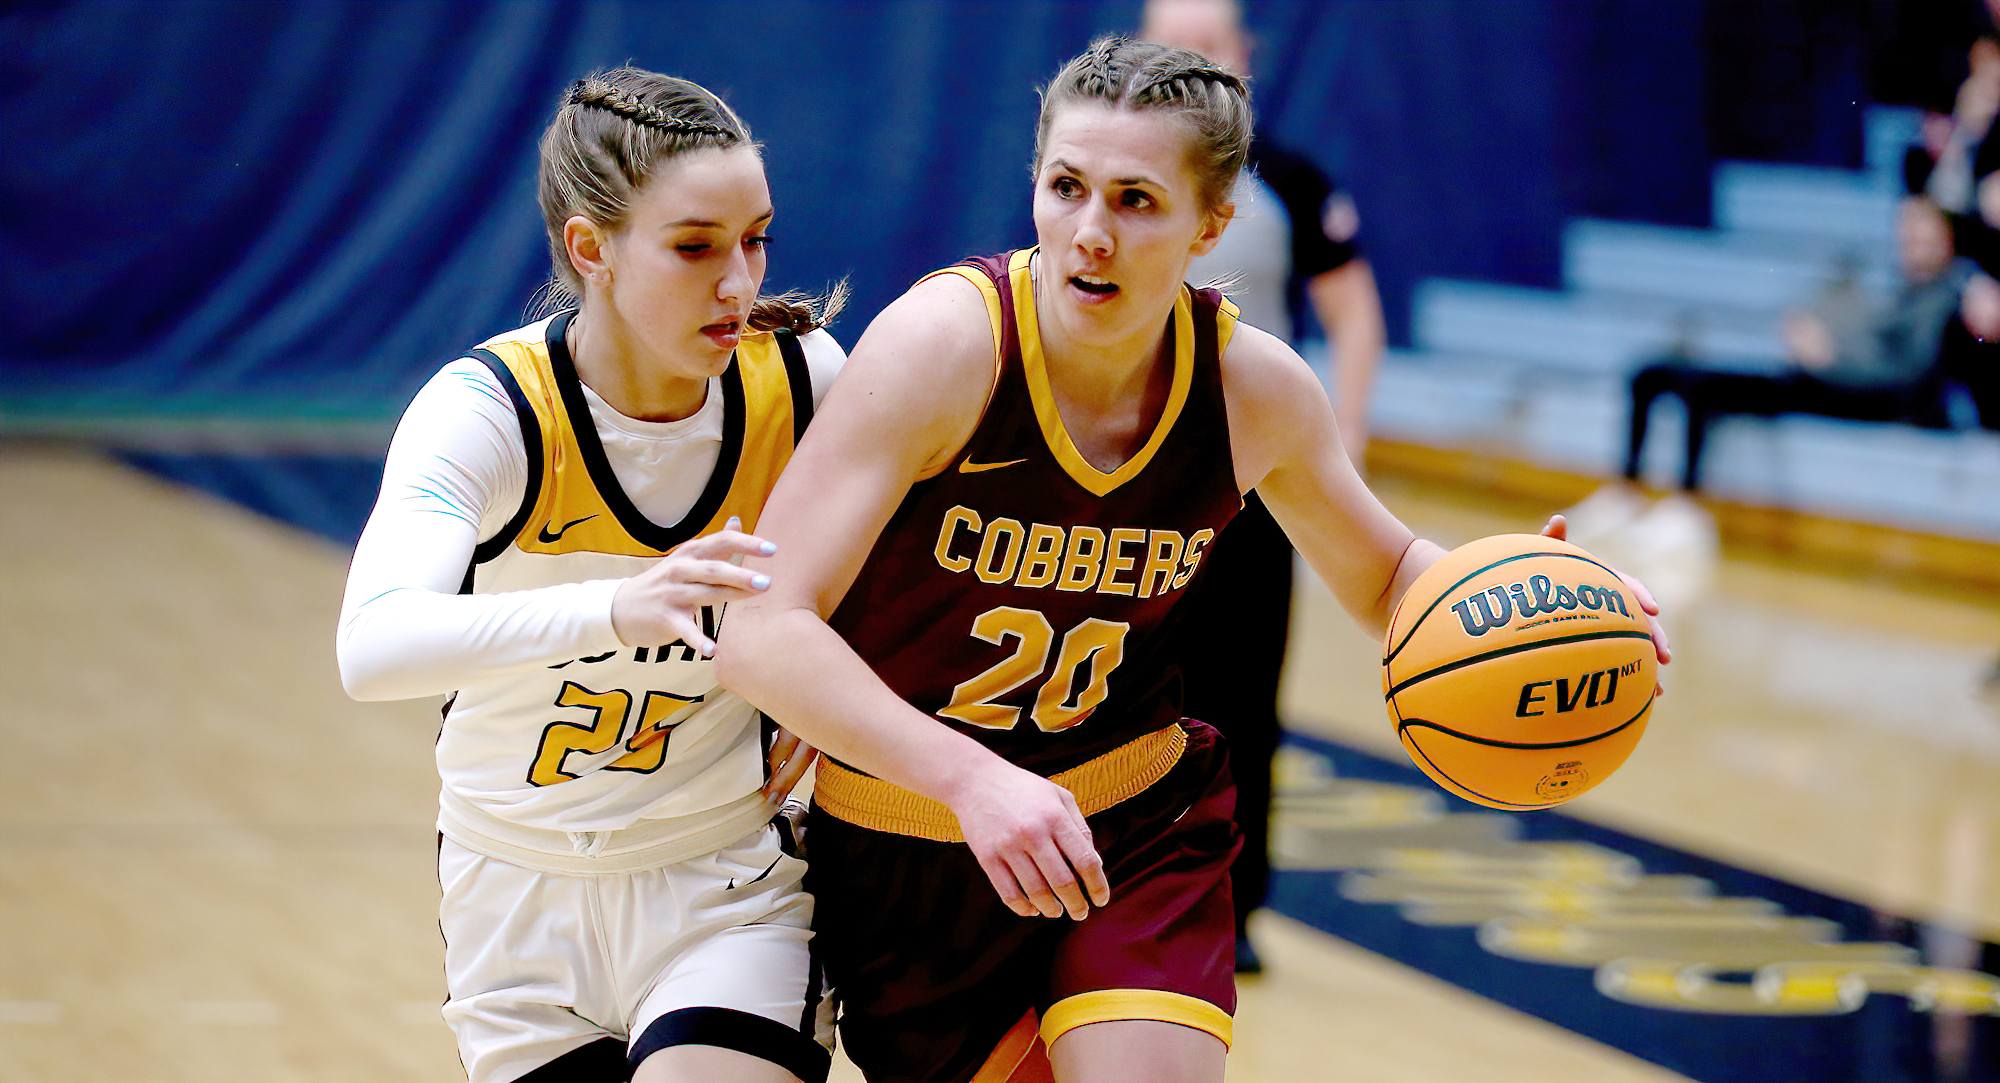 Emily Beseman drives past a Gustie defender in the Cobbers' game at #8 Gustavus. (Photo courtesy of Ryan Coleman, D3photography.com)